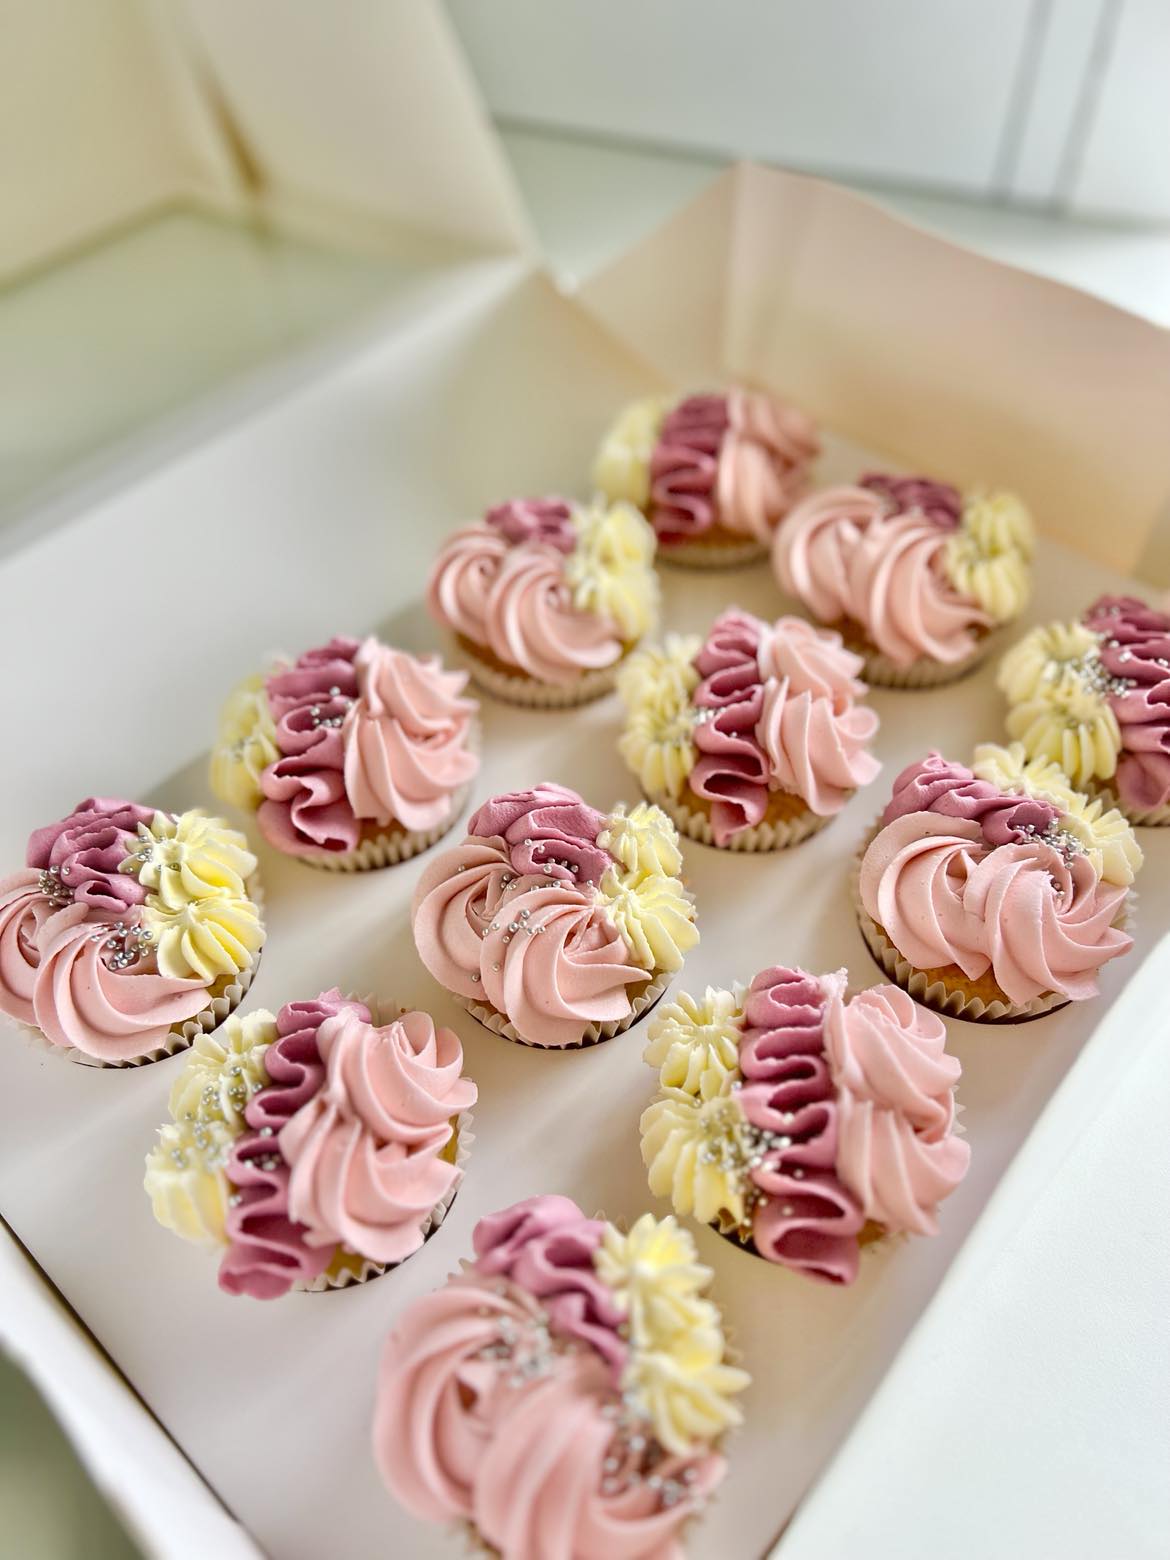 Mothers day cupcake class - Saturday 11th May, 1-2:30pm